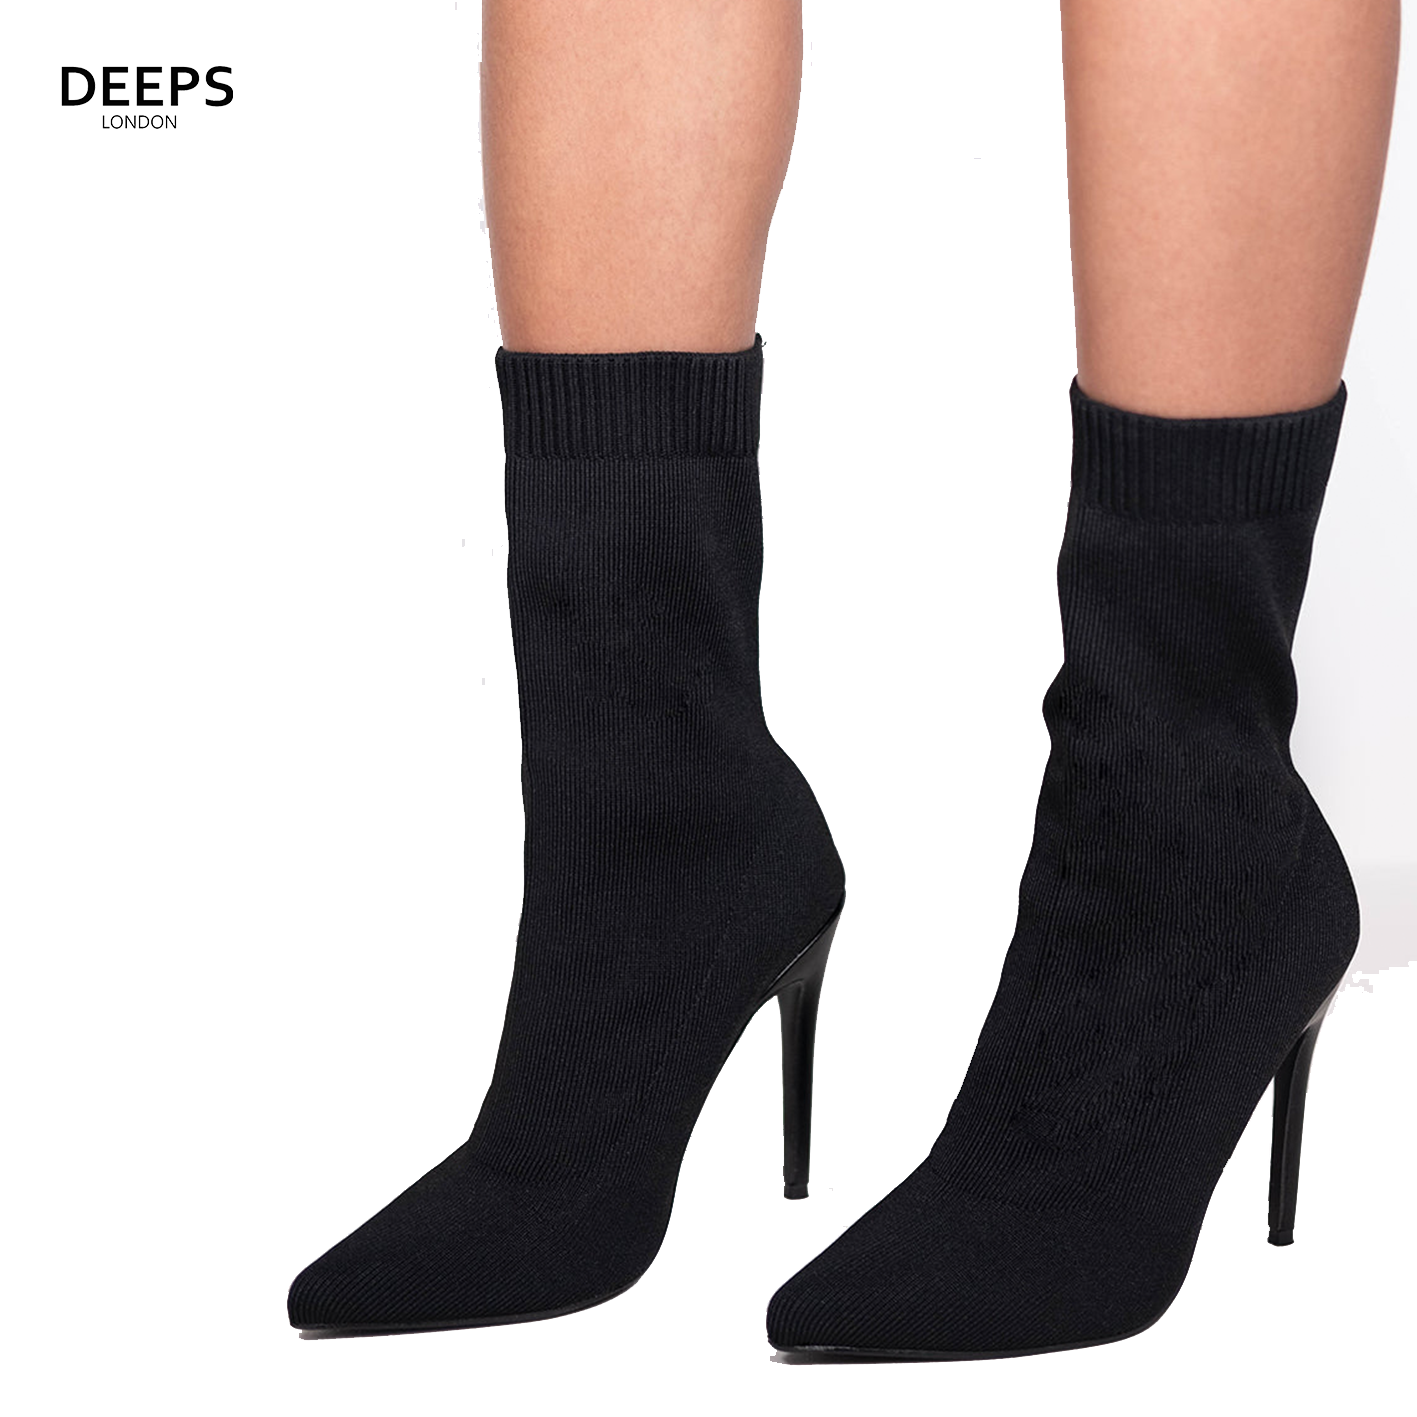 DANA ANKLE BOOTS KNITTED STILETTO HIGH HEELS BLACK